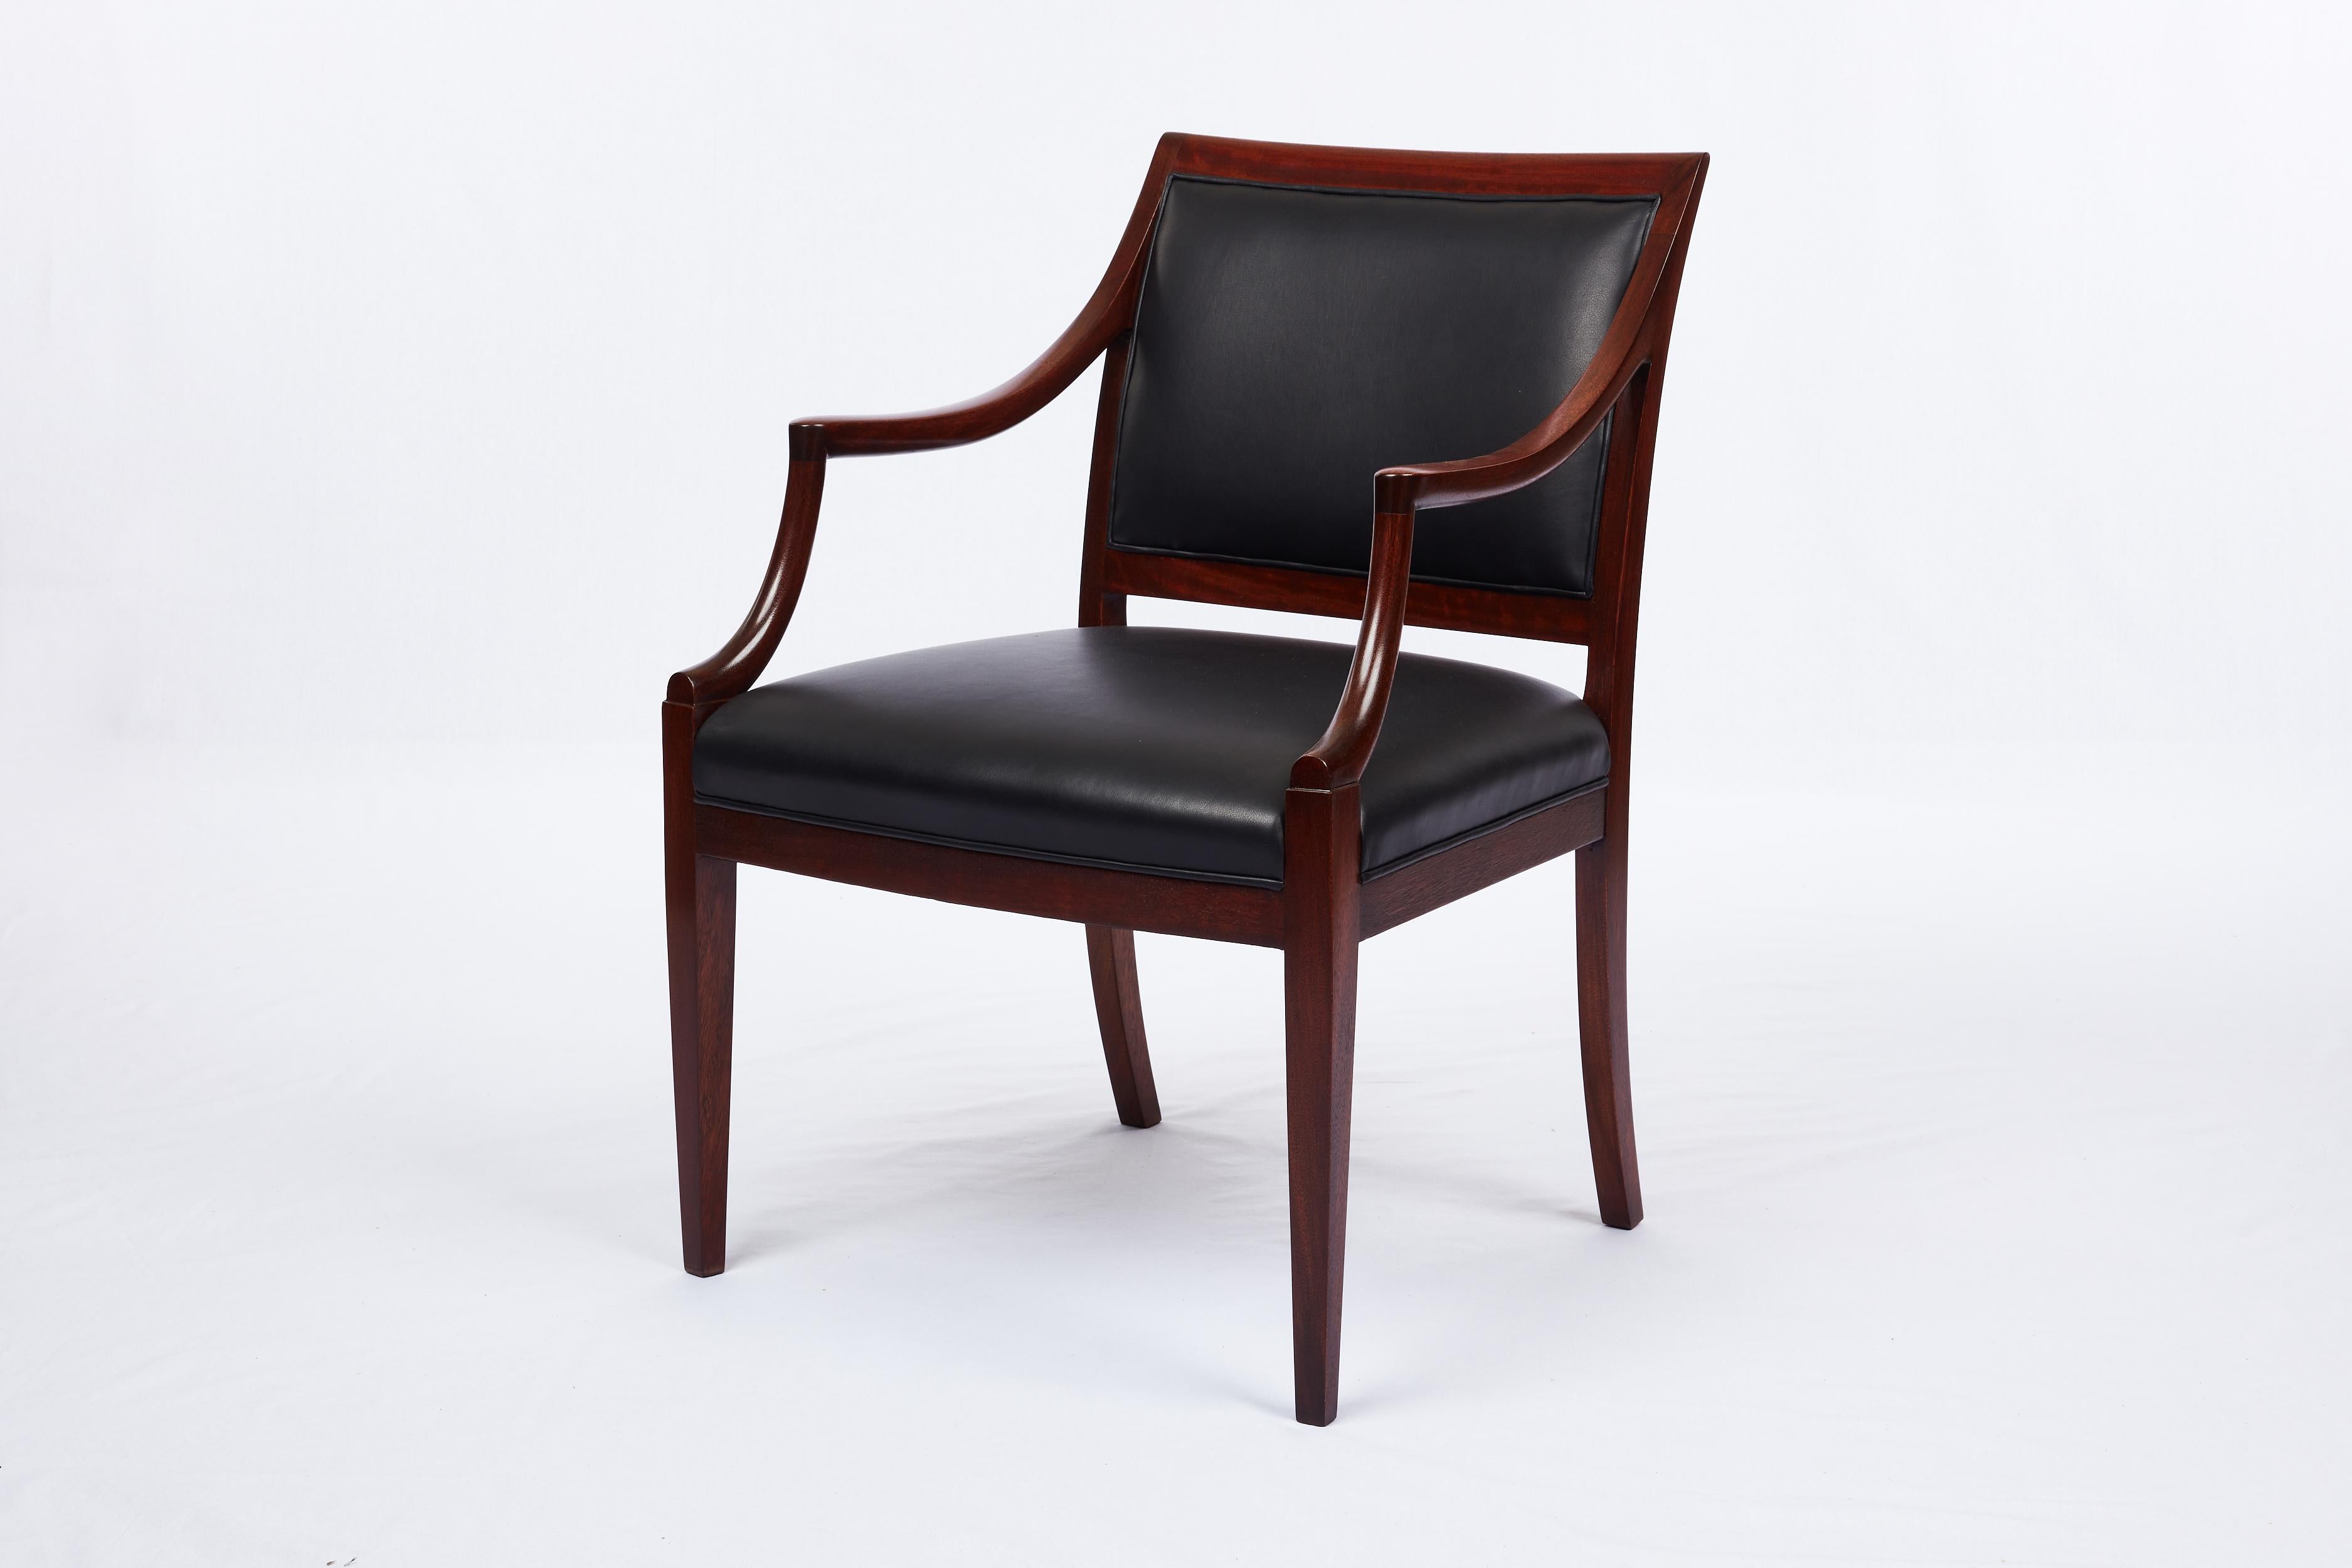 Frits Henningsen armchair. Wood is Mahogany. New black leather. 1940's.
 